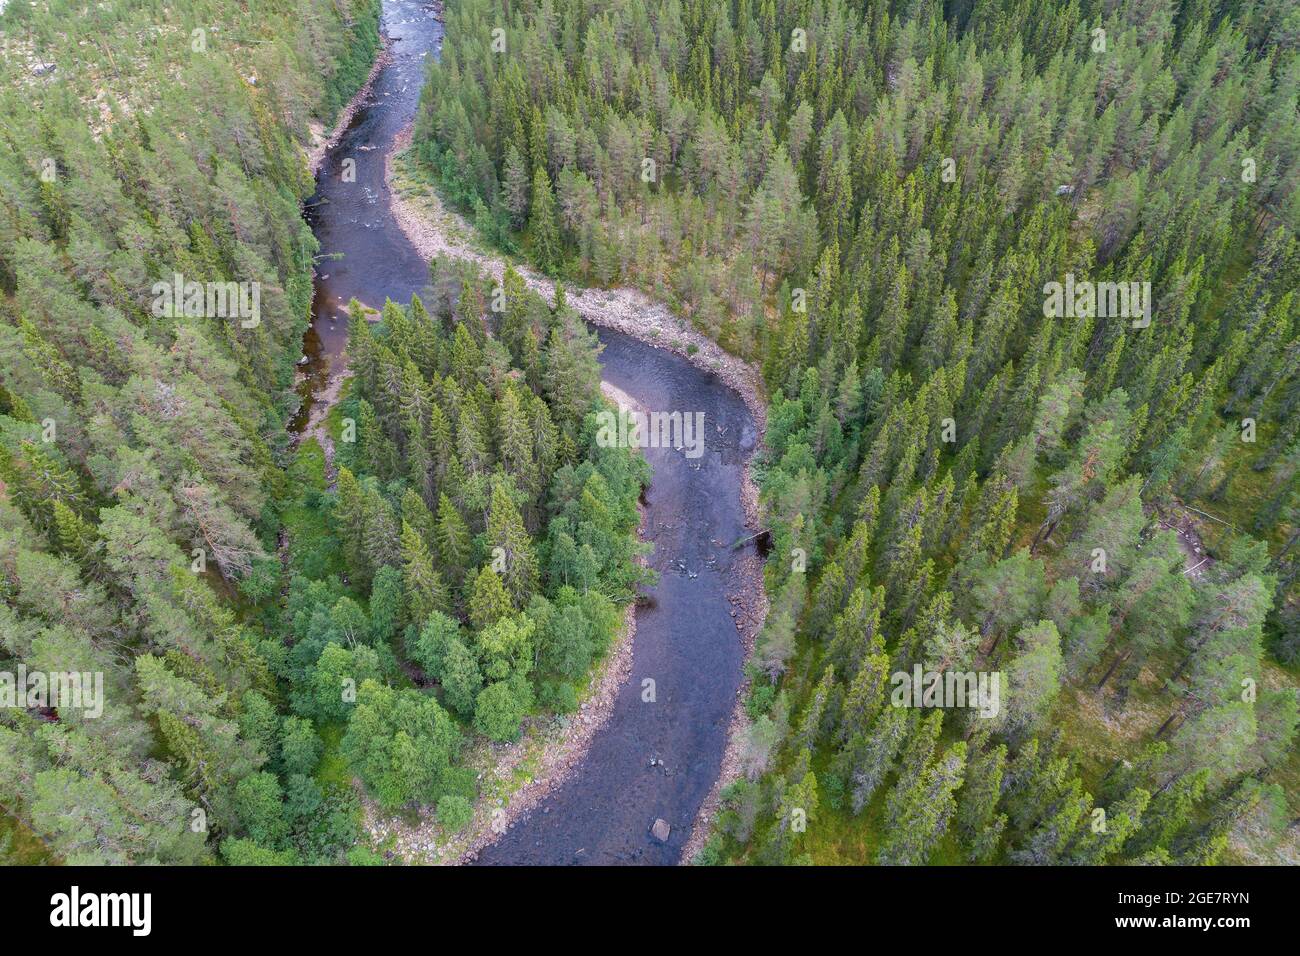 River bend running through dense pine tree forest in the northern part of Sweden. Aerial view. Stock Photo